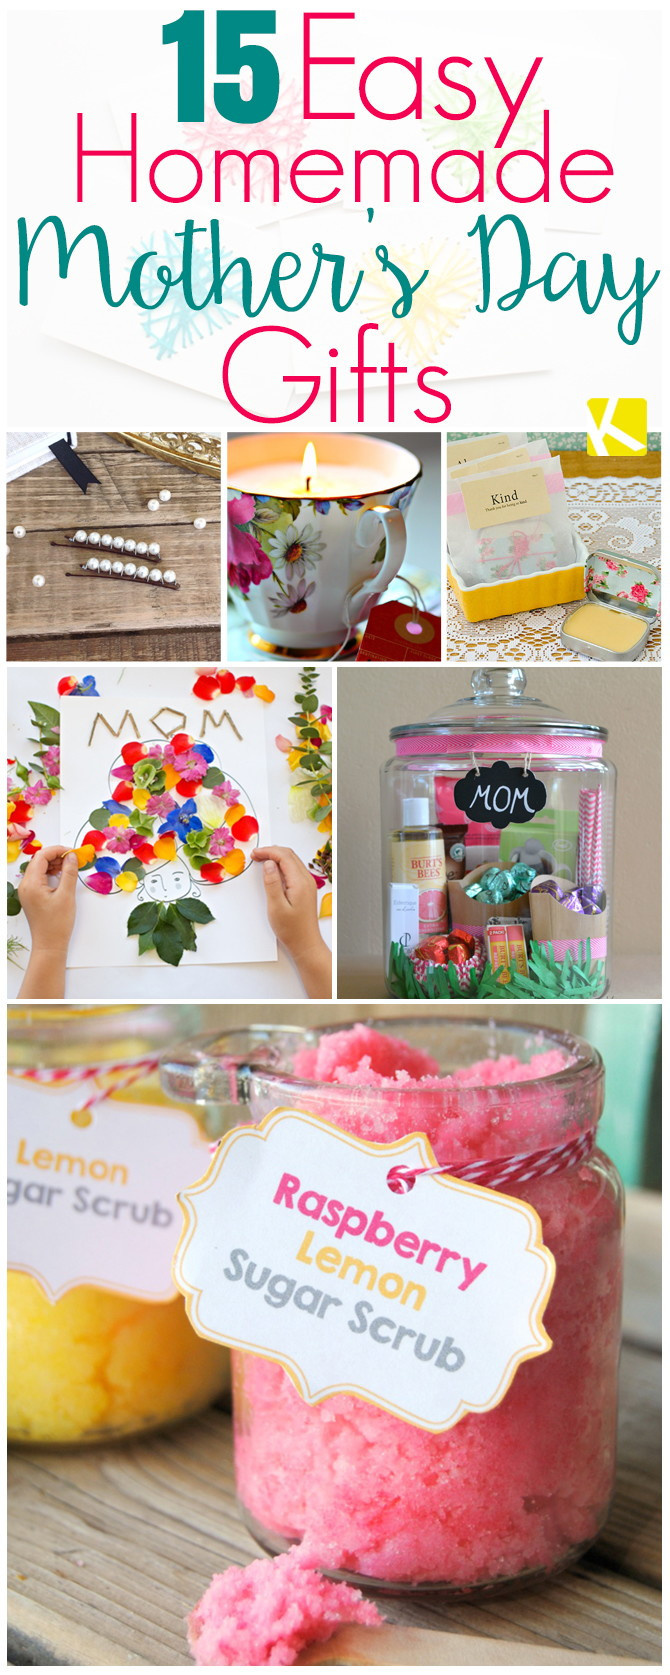 Mothers Day Ideas To Make
 15 Mother’s Day Gifts That Are Ridiculously Easy to Make